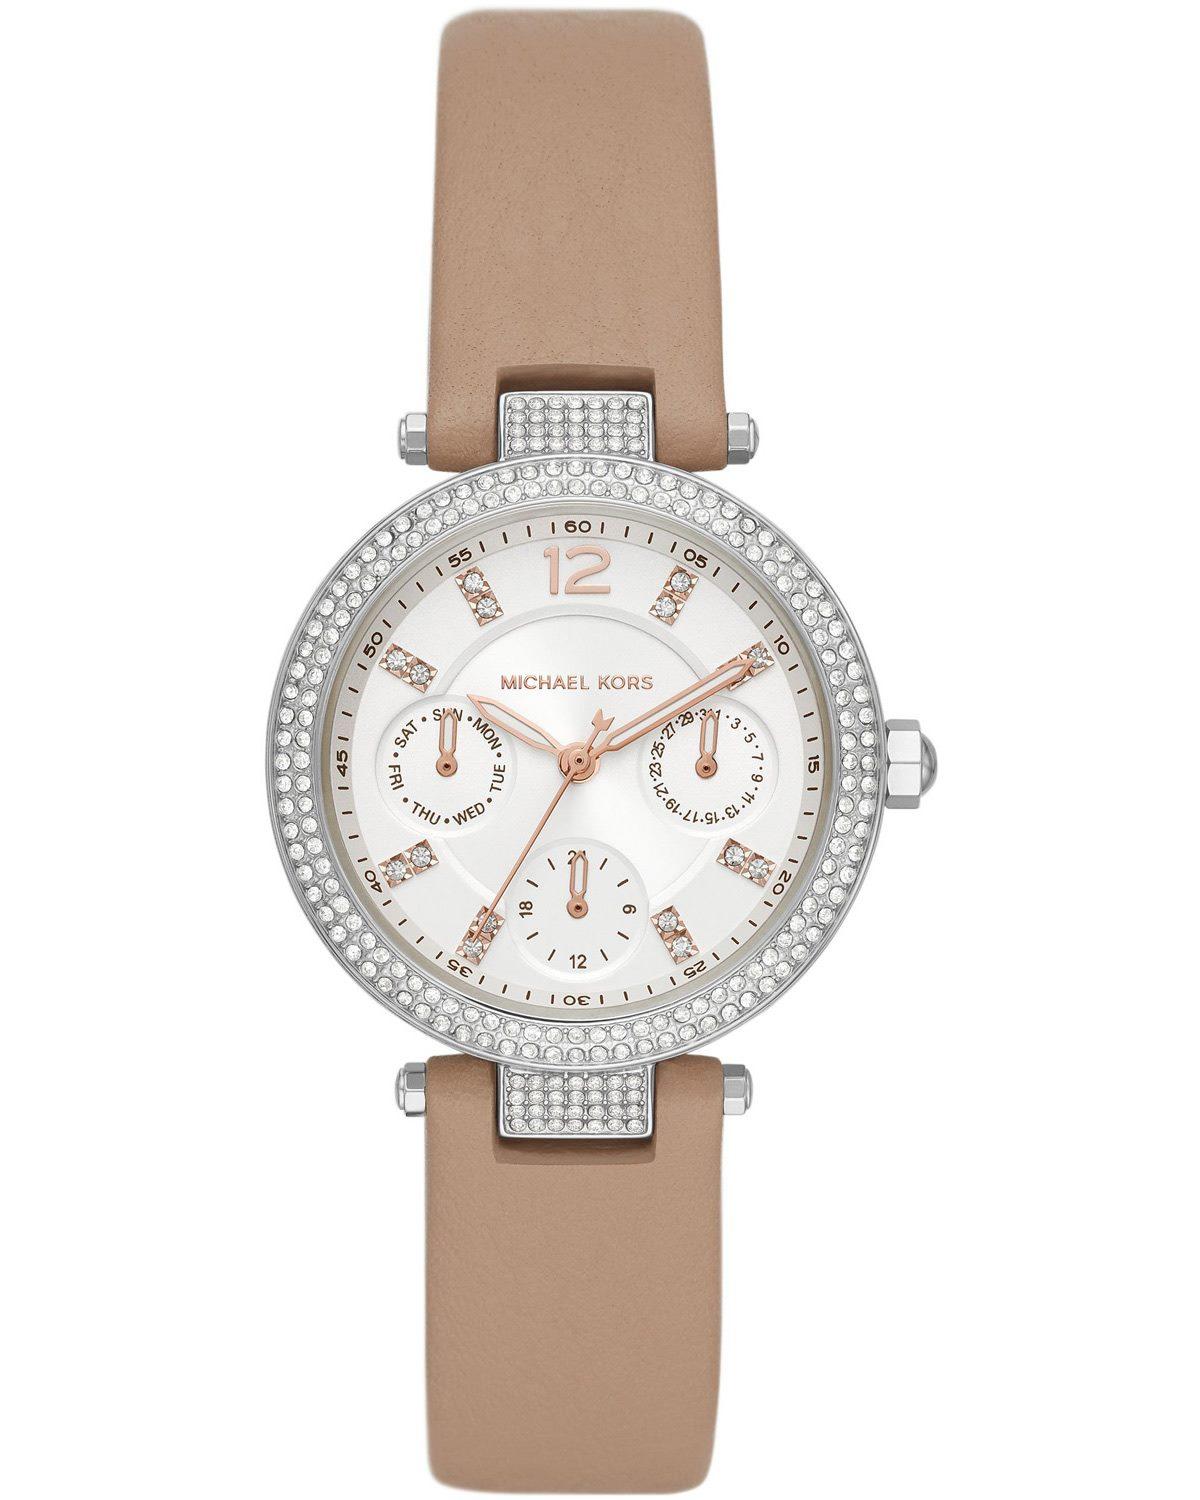 MICHAEL KORS Parker - MK2913, Silver case with Brown Leather Strap